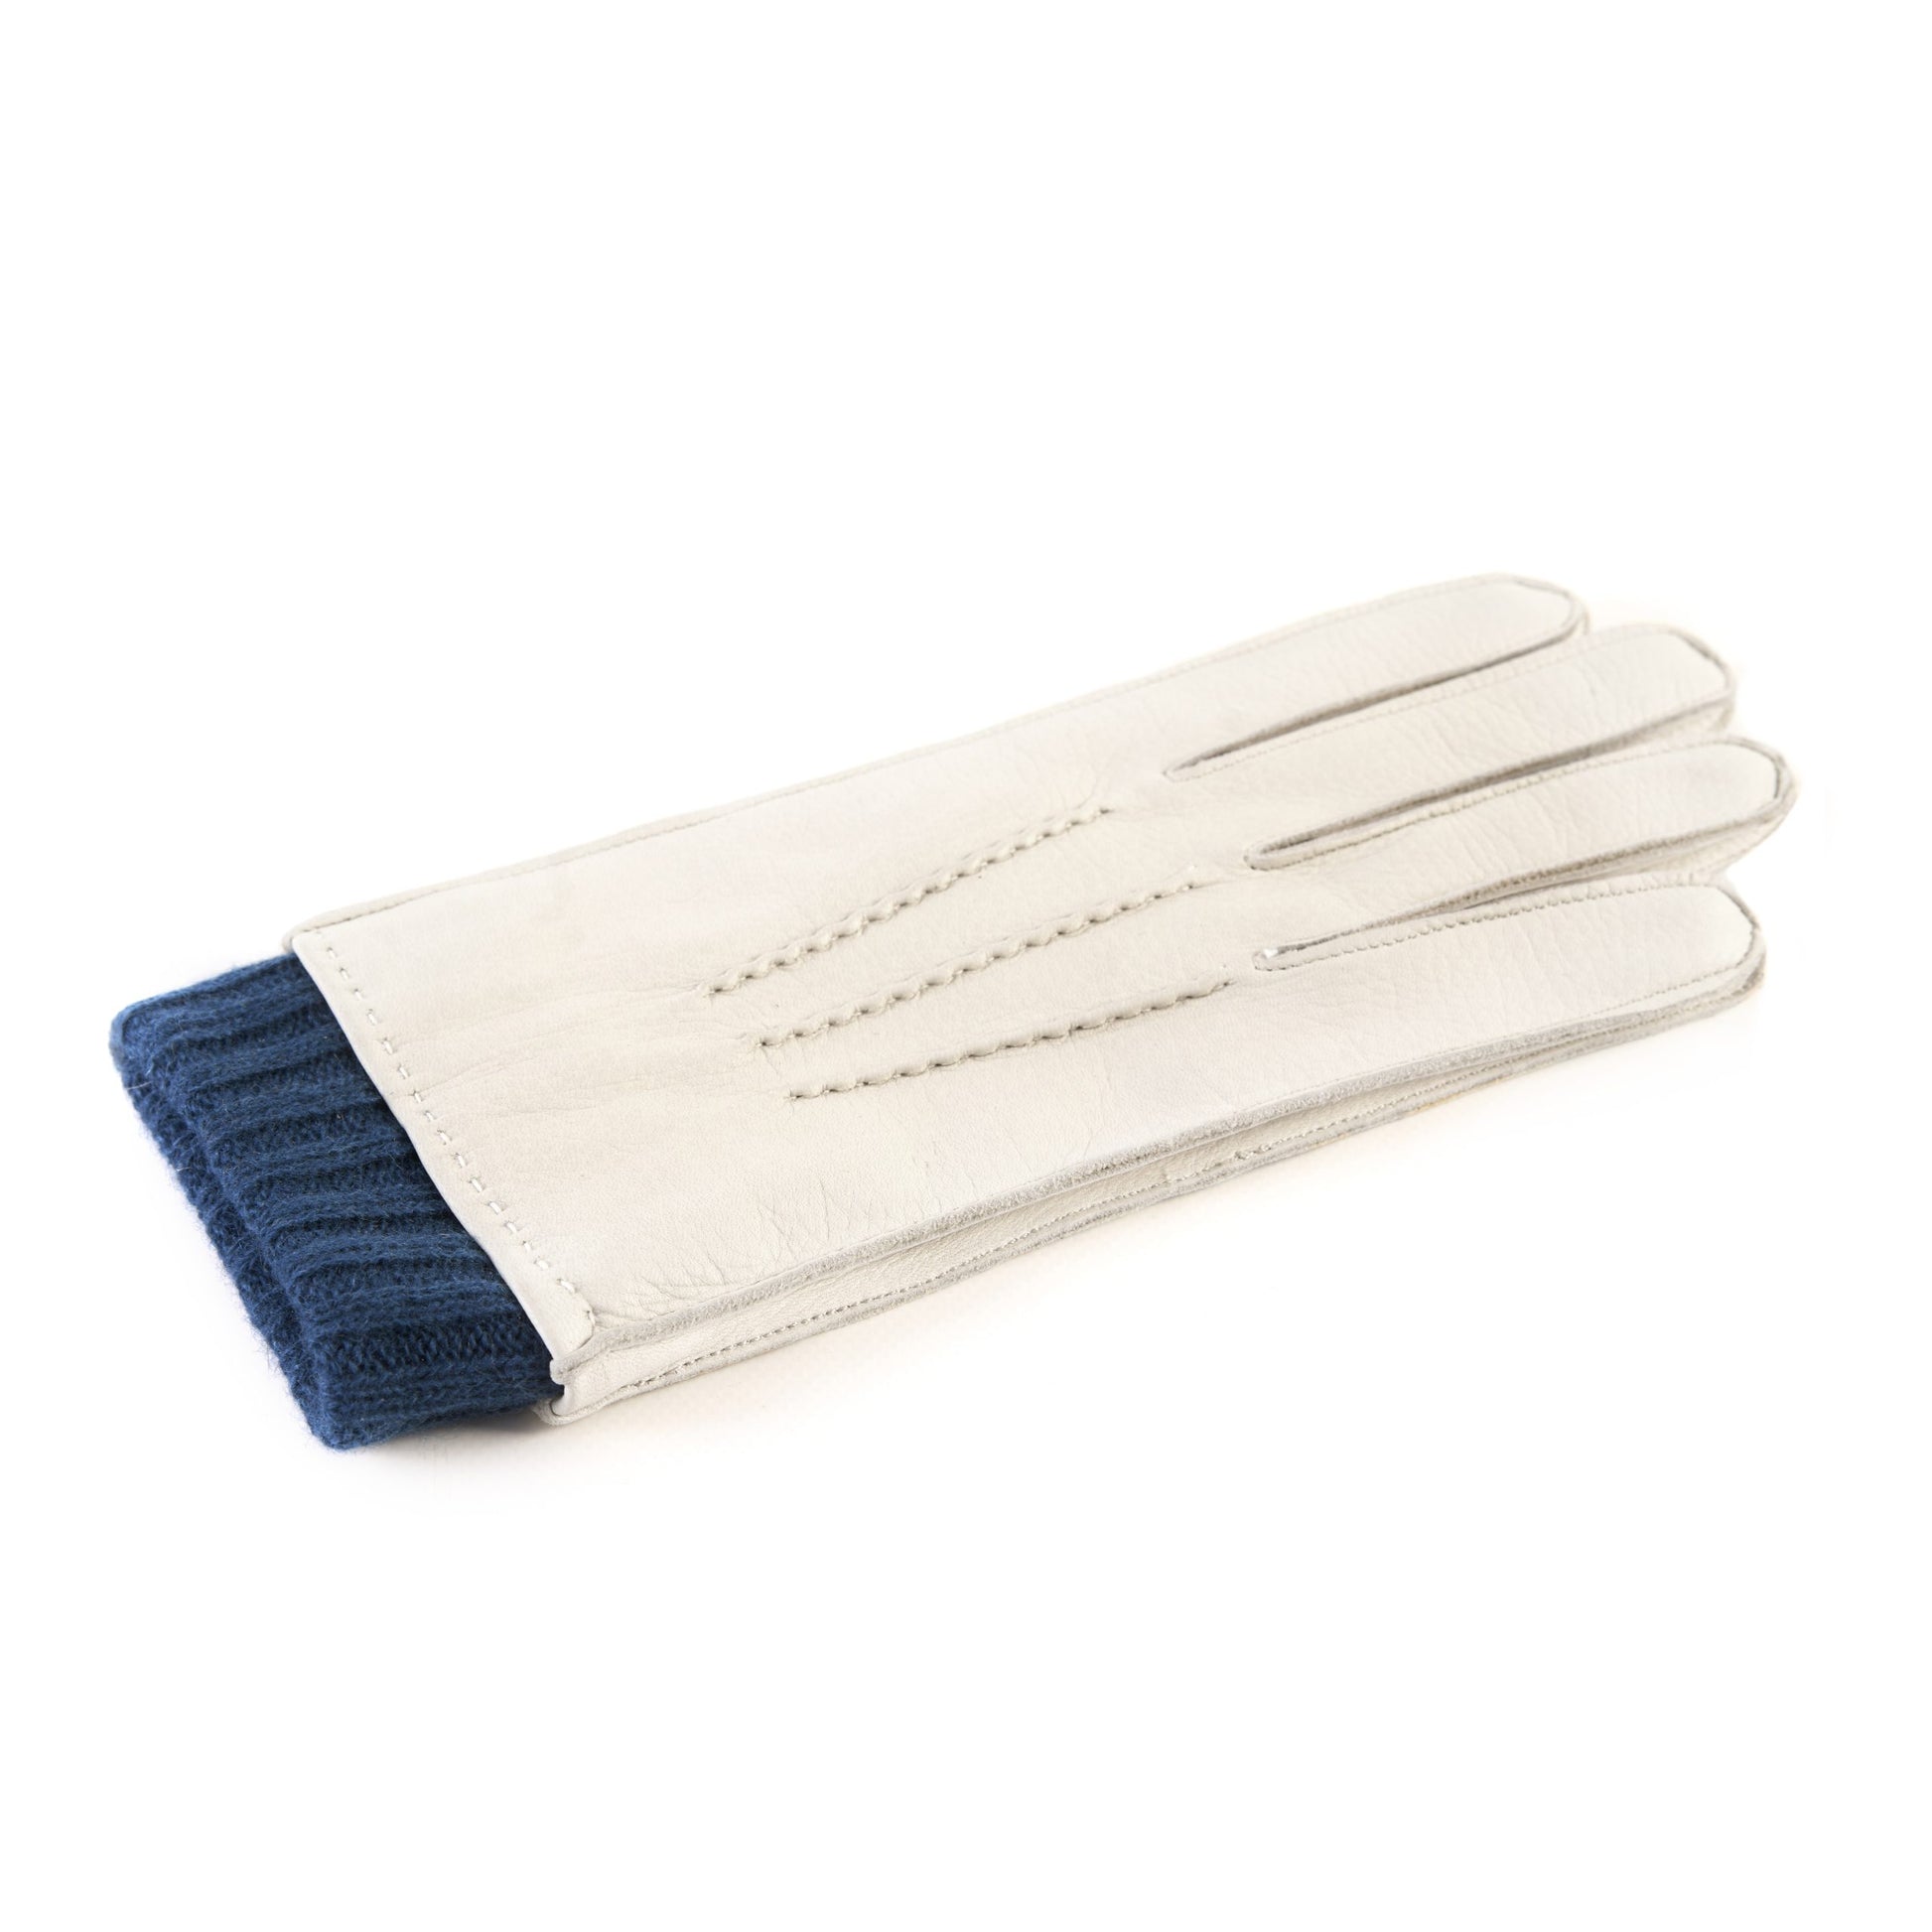 Men's white deerskin gloves with petrol cashmere lining with cuff